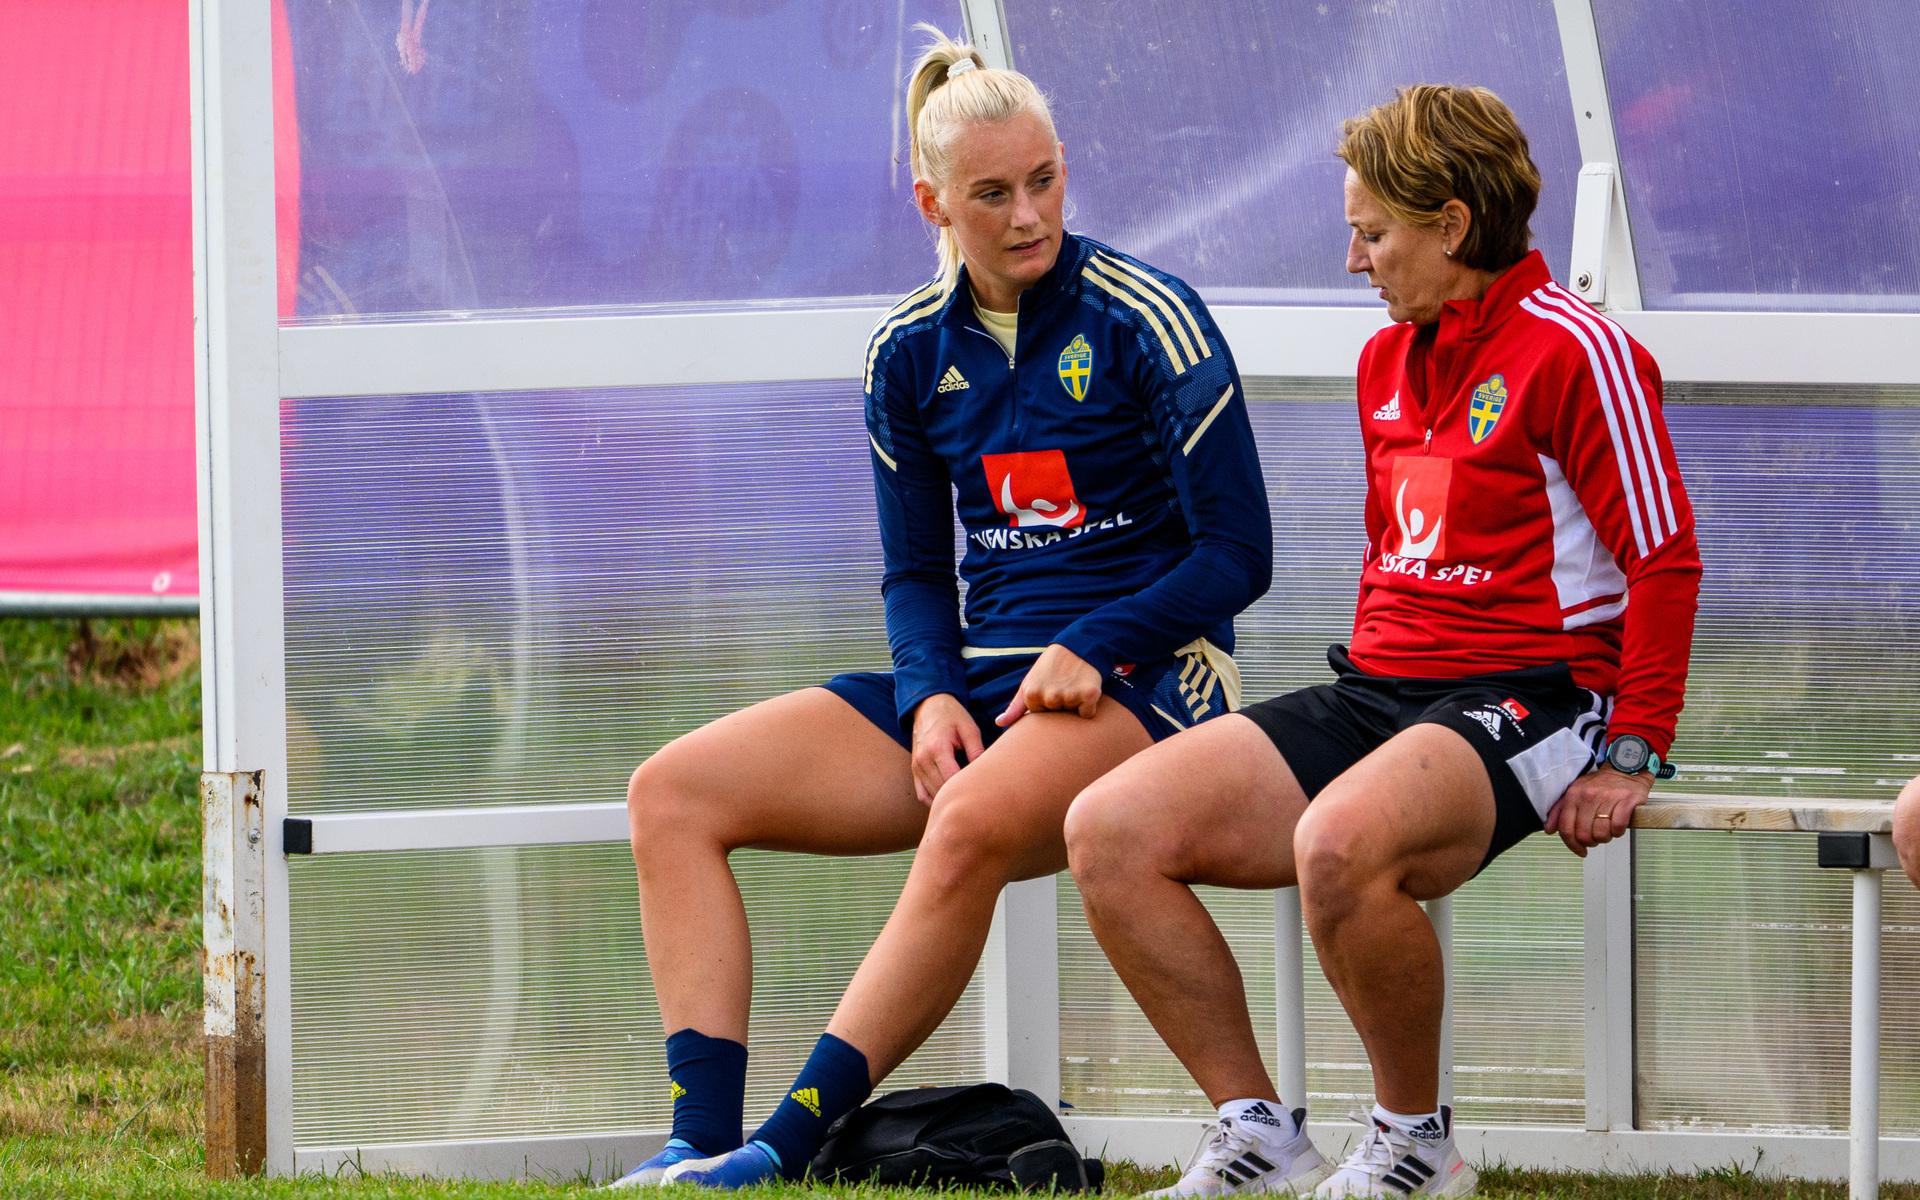 220703 Stina Blackstenius and speaks with physio Annica Näsmark during a training session with the the women&apos;s Swedish national football team ahead of UEFA Women&apos;s Euro 2022 Championship on July 3, 2022 in Chester. Photo: Ludvig Thunman / BILDBYRÅN / kod LT / LT0343